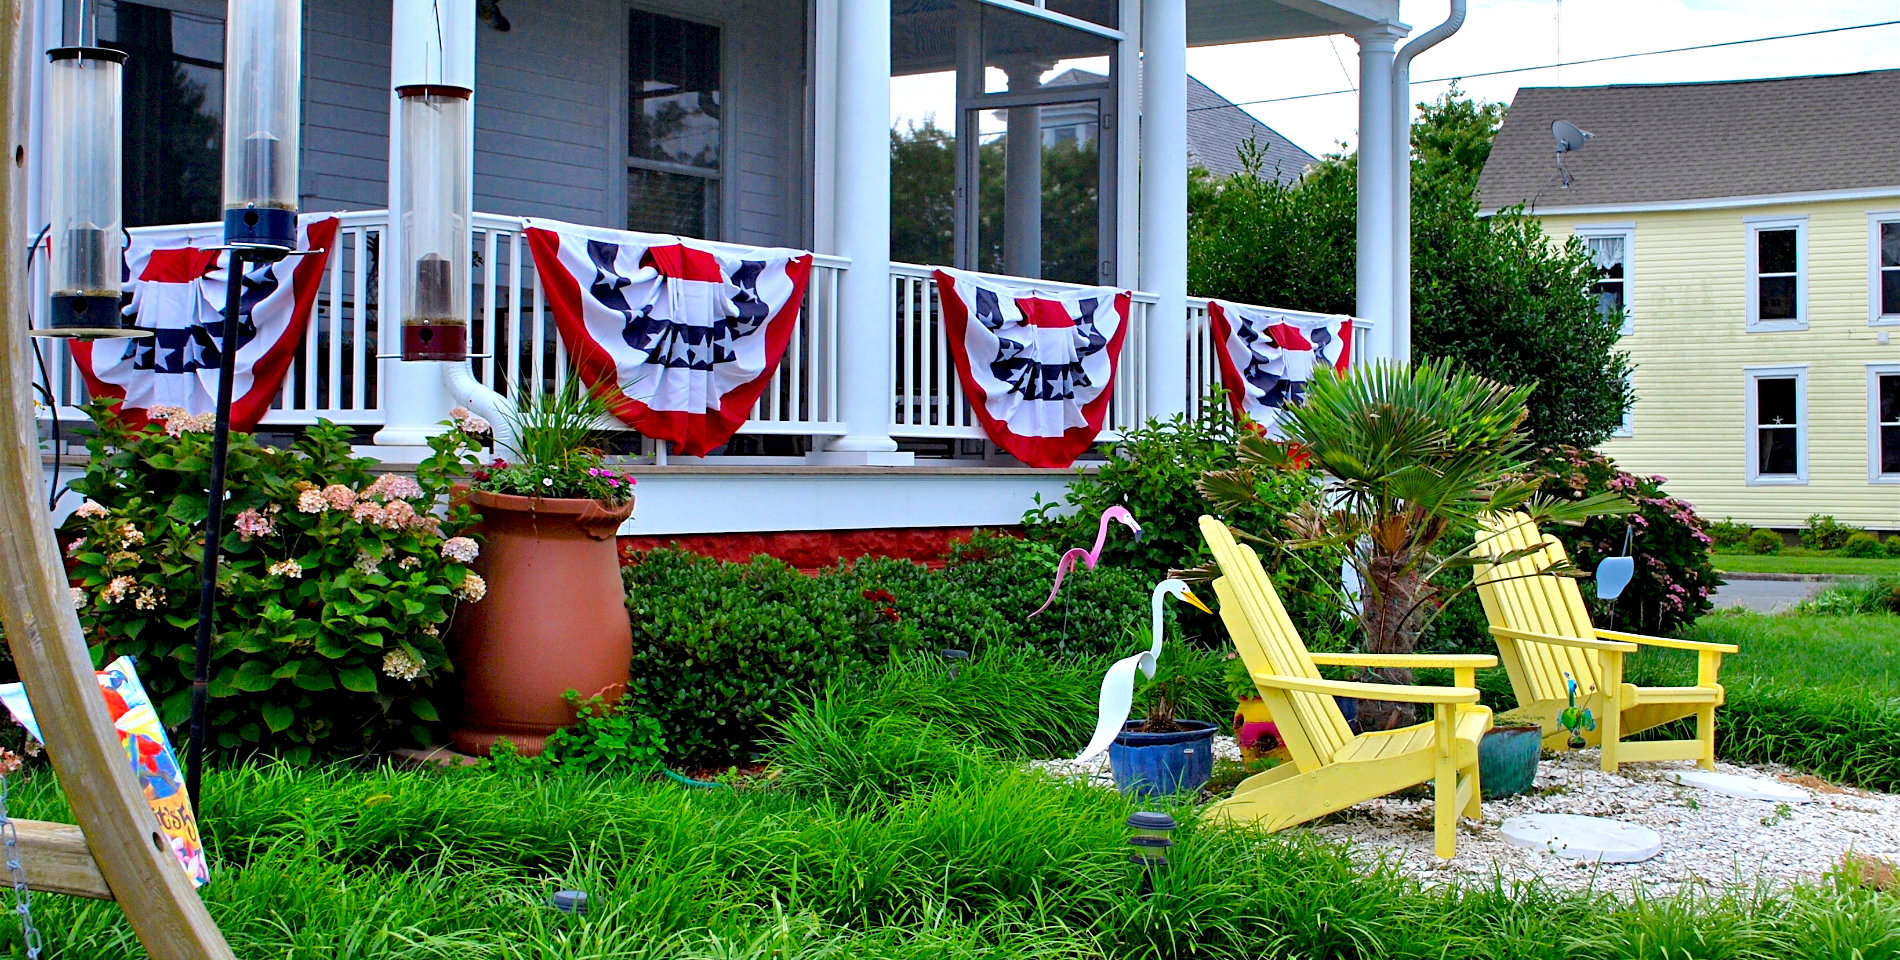 Two yellow Adirondack chairs before the front porch decorated with red, white and blue patriotic sashes. 